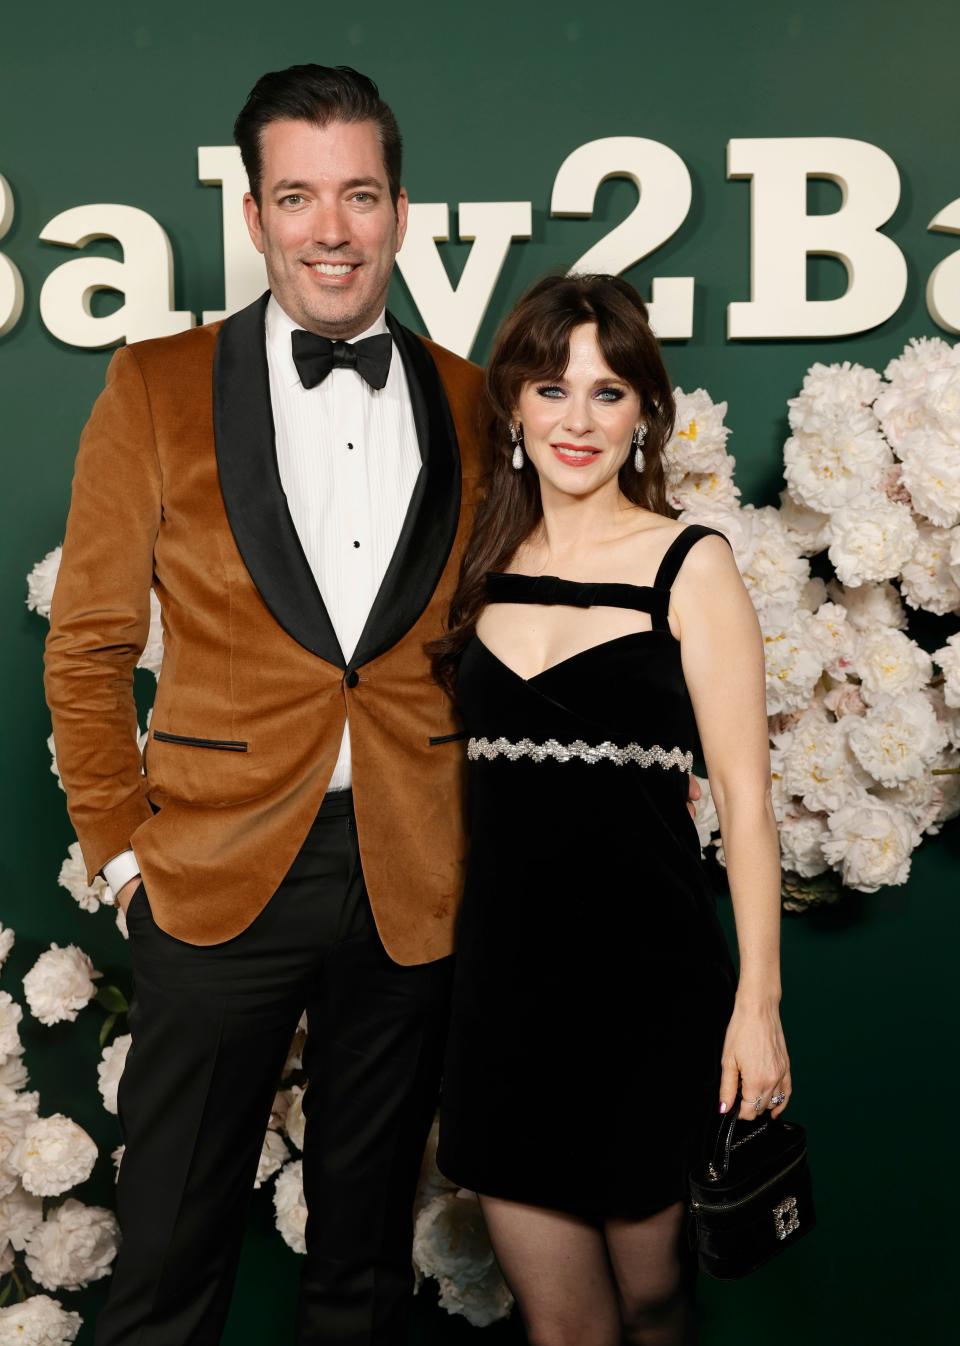 WEST HOLLYWOOD, CALIFORNIA - NOVEMBER 11: (L-R) Jonathan Scott and Zooey Deschanel attend 2023 Baby2Baby Gala Presented By Paul Mitchell at Pacific Design Center on November 11, 2023 in West Hollywood, California. (Photo by Stefanie Keenan/Getty Images for Baby2Baby)